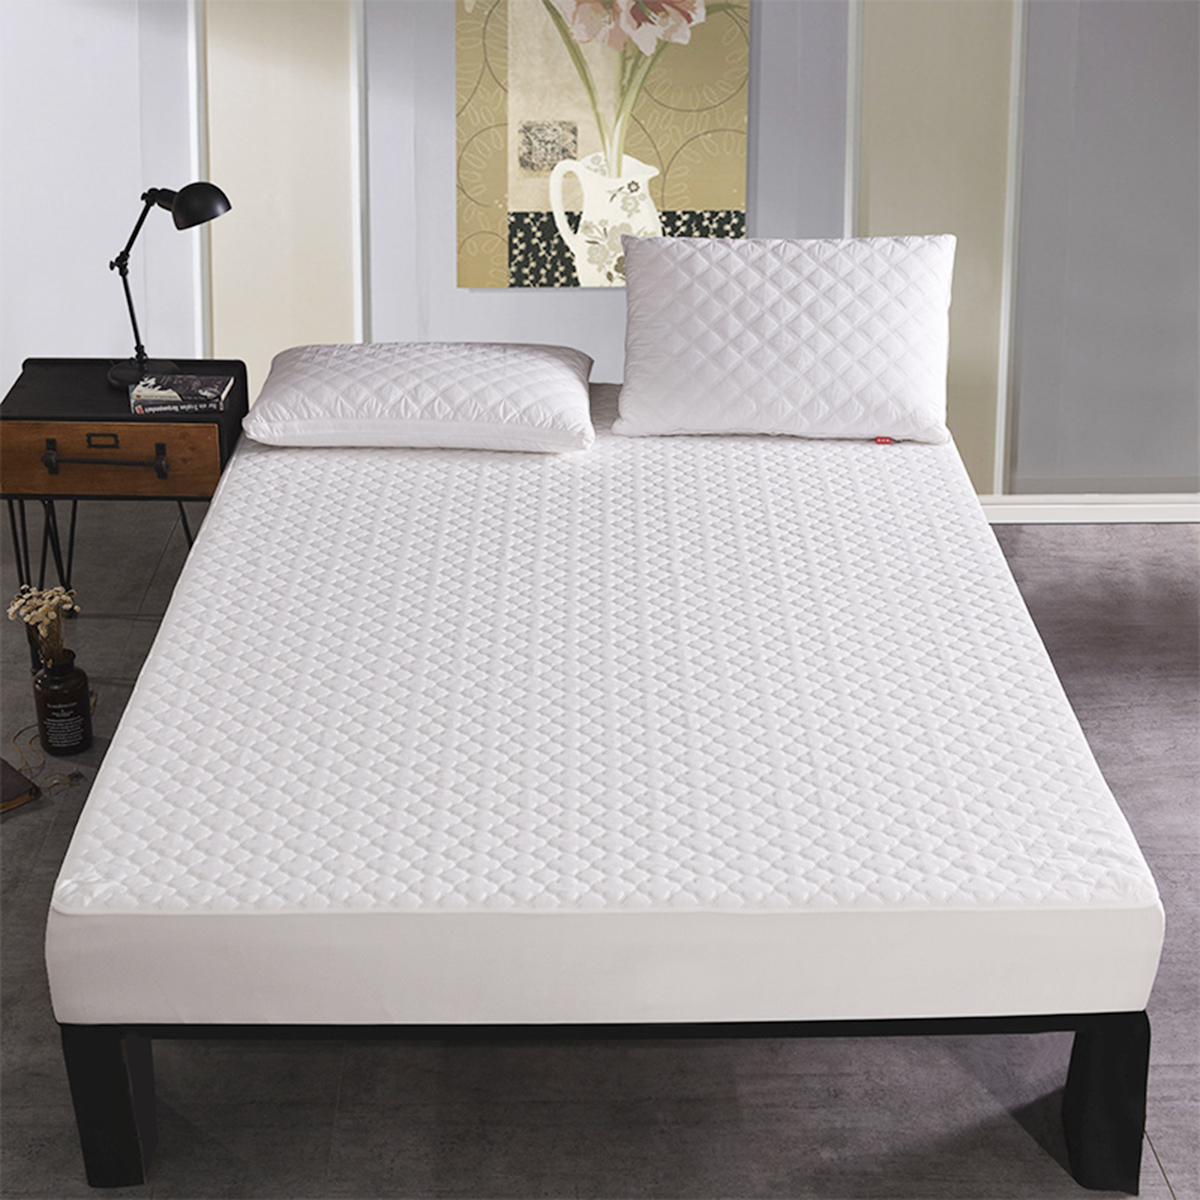 Multi-size-Washable-White-Quilted-Mattress-Covers-Waterproof-Protector-Pad-With-Tightly-Elastic-Band-1692754-8